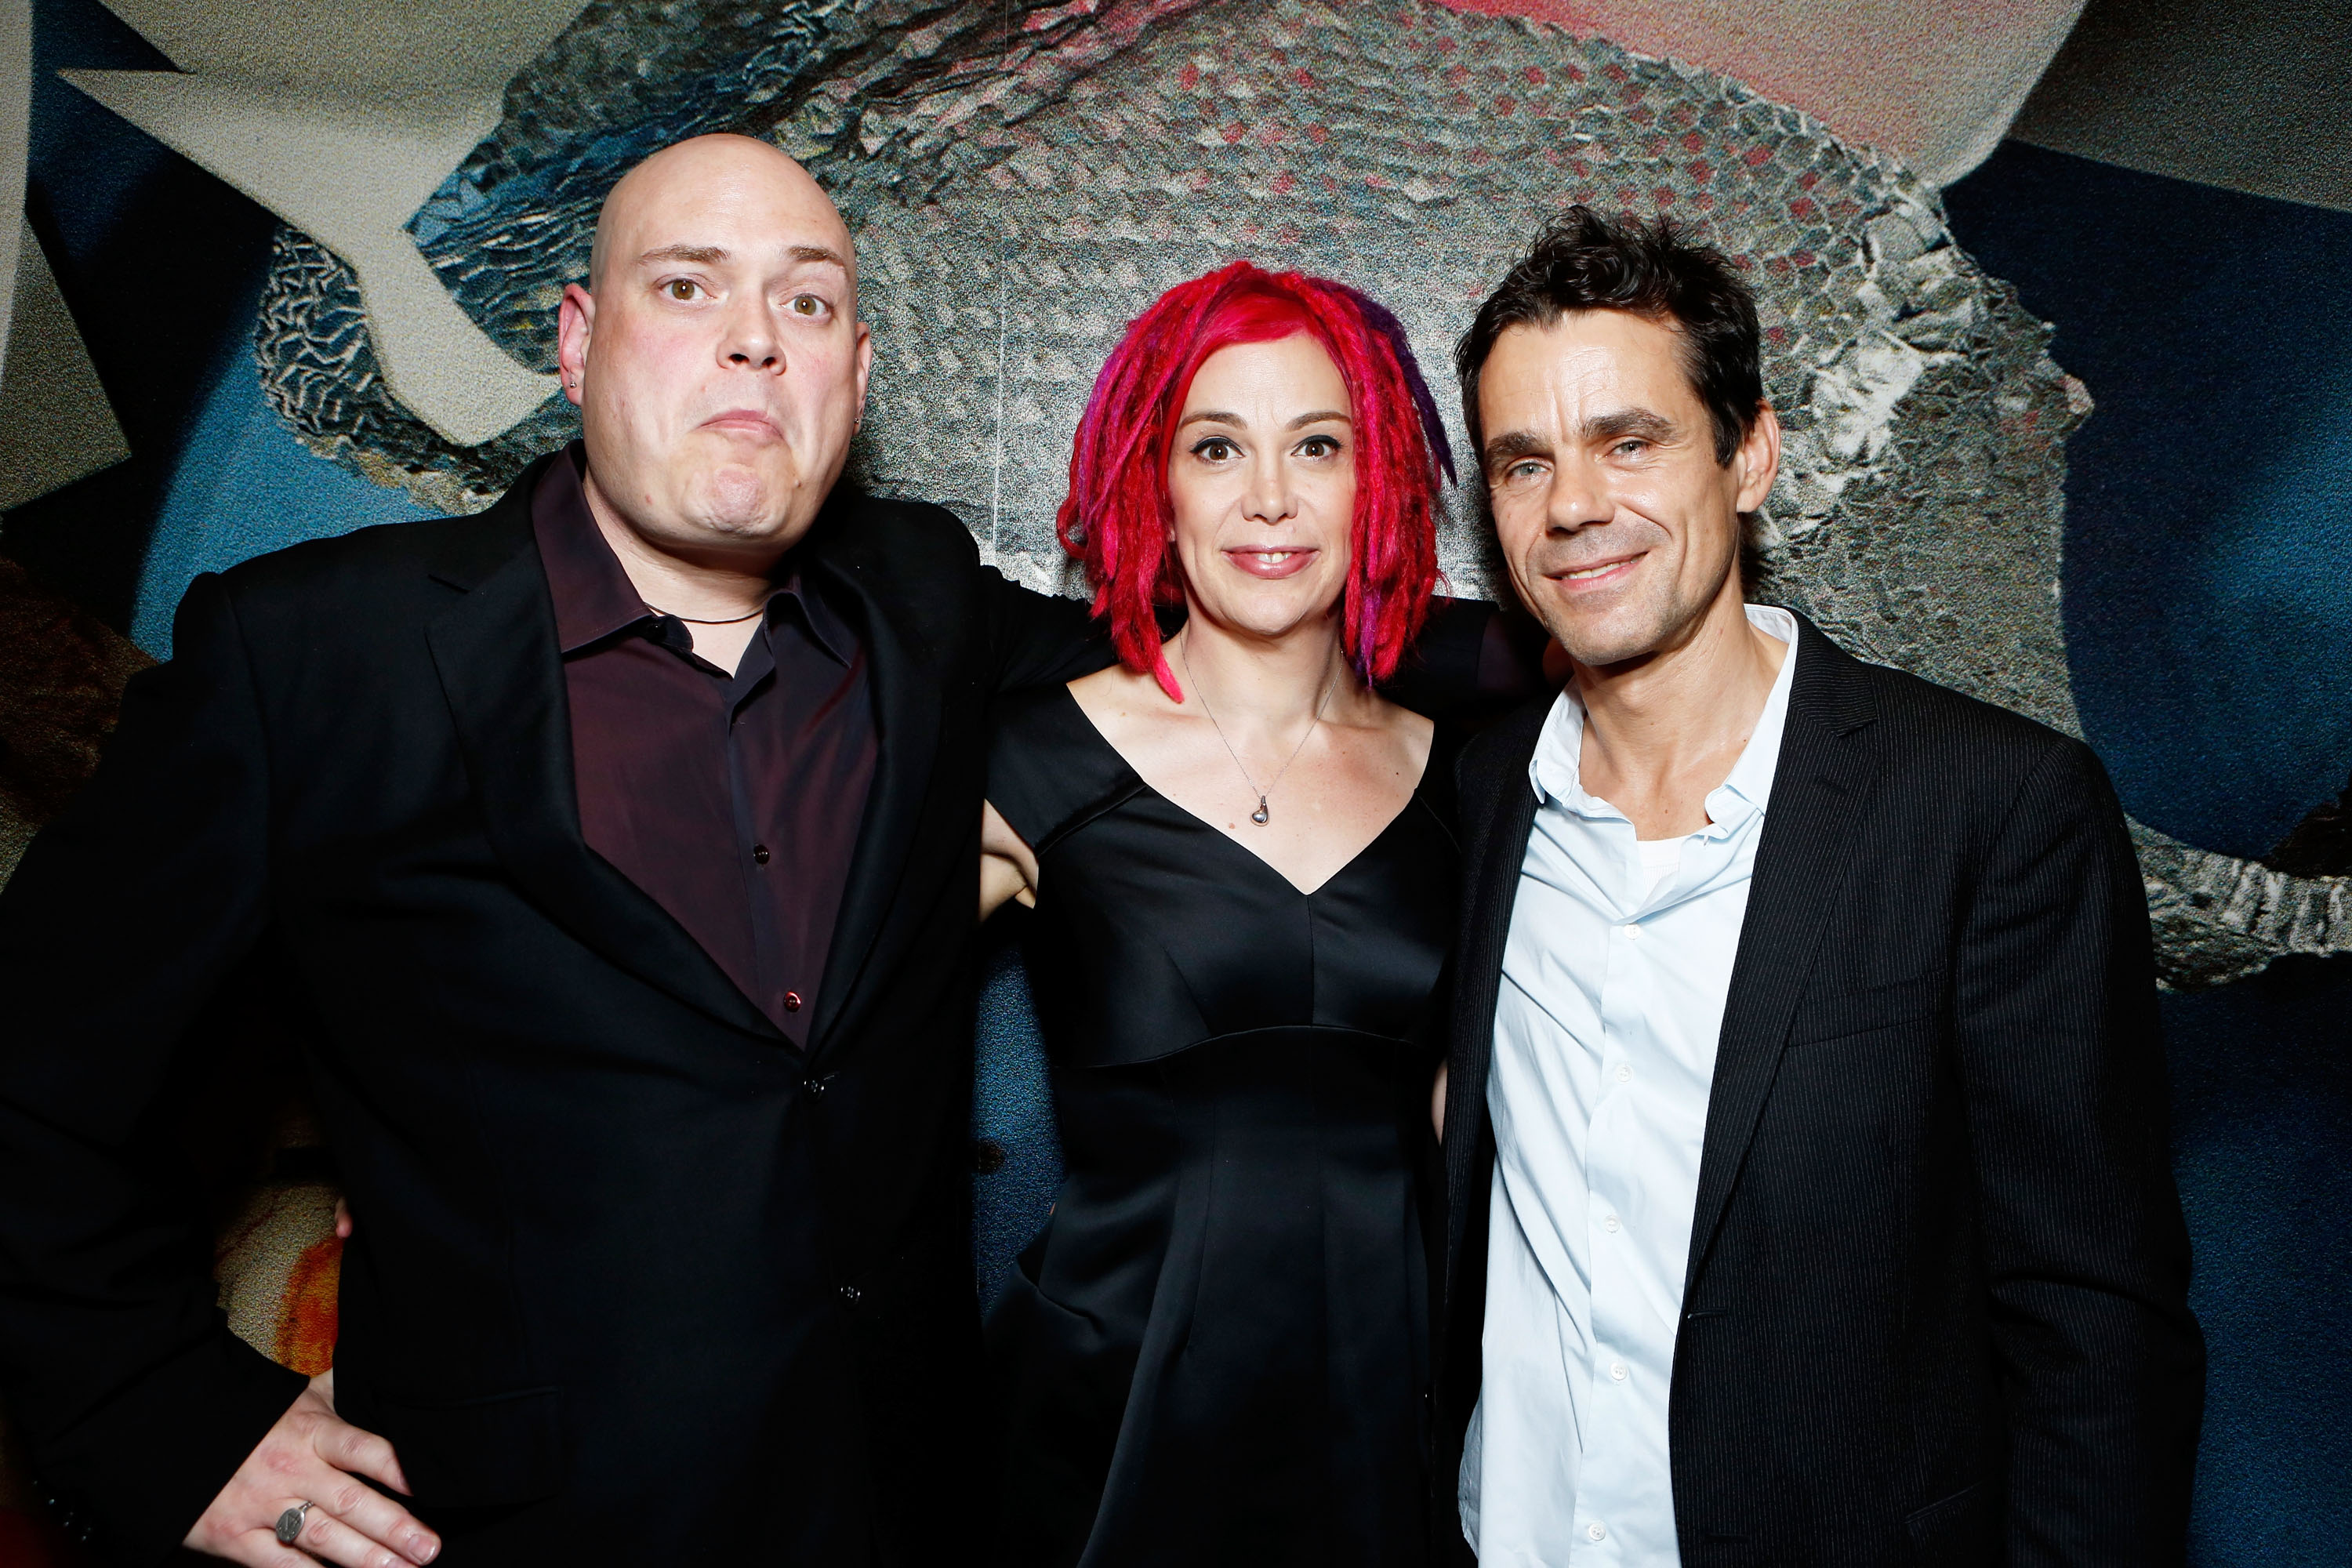 Andy Wachowski, Lana Wachowski, and Tom Tykwer at the premiere of "Cloud Atlas," 2012 | Source: Getty Images